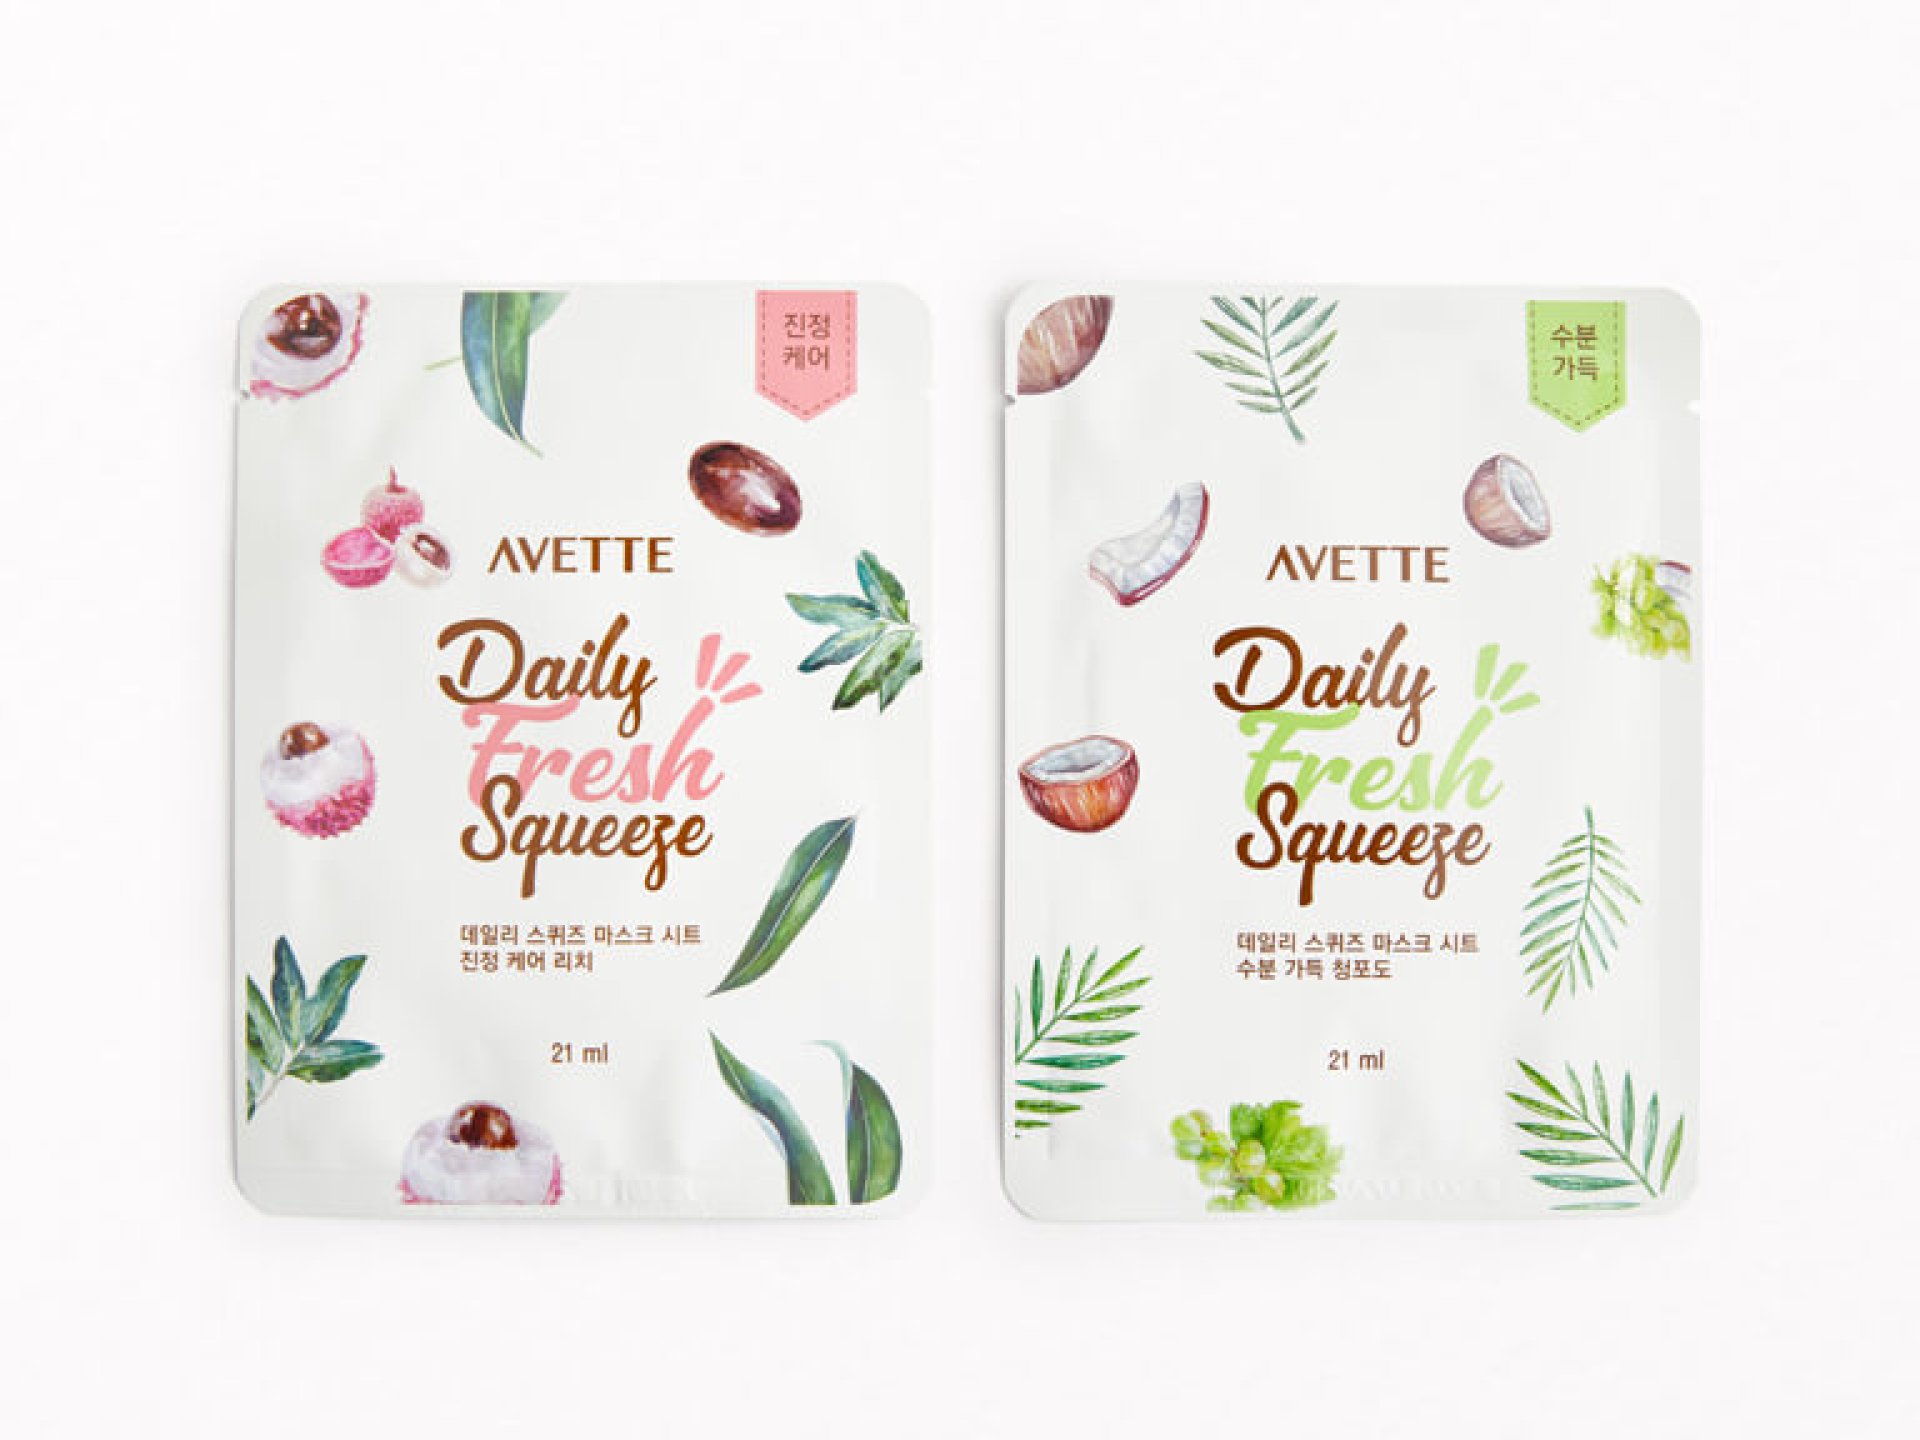 AVETTE Daily Fresh Squeeze Sheet Mask Duo in Grape and Lychee